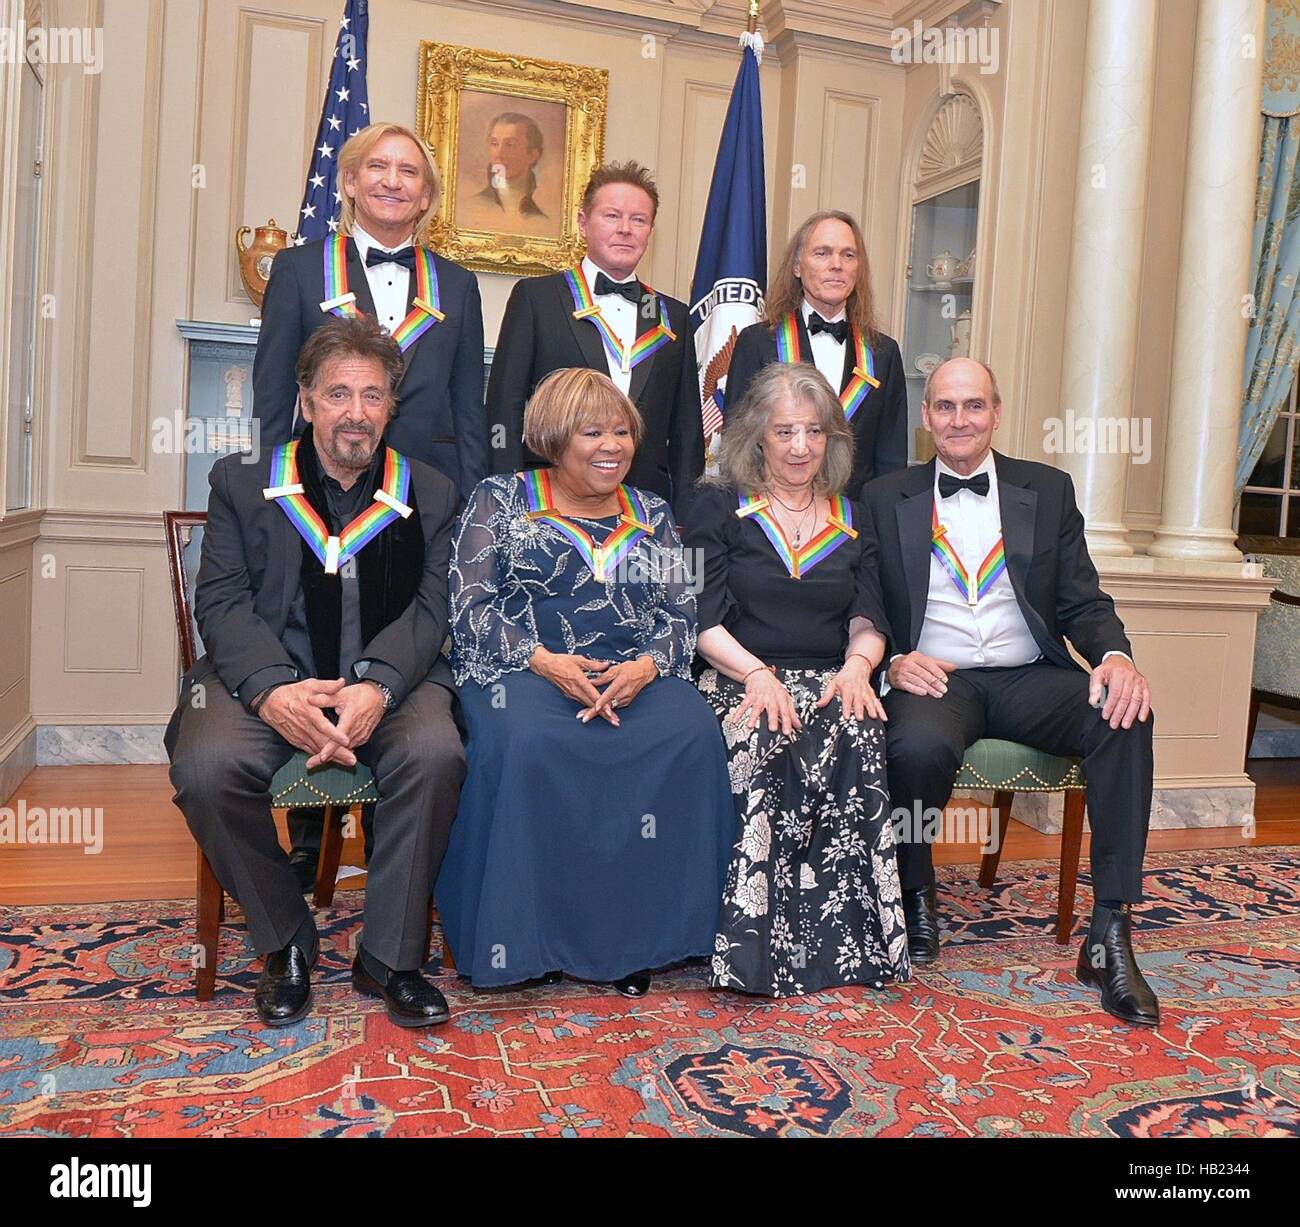 The 2016 Kennedy Center Honor Award recipients pose for a group photo following the gala dinner at the Department of State December 3, 2016 in Washington, DC. First row left to right are: Al Pacino, Mavis Staples, Martha Argerich and James Taylor; back row, from left: Joe Walsh, Don Henley and Timothy Schmit. Stock Photo